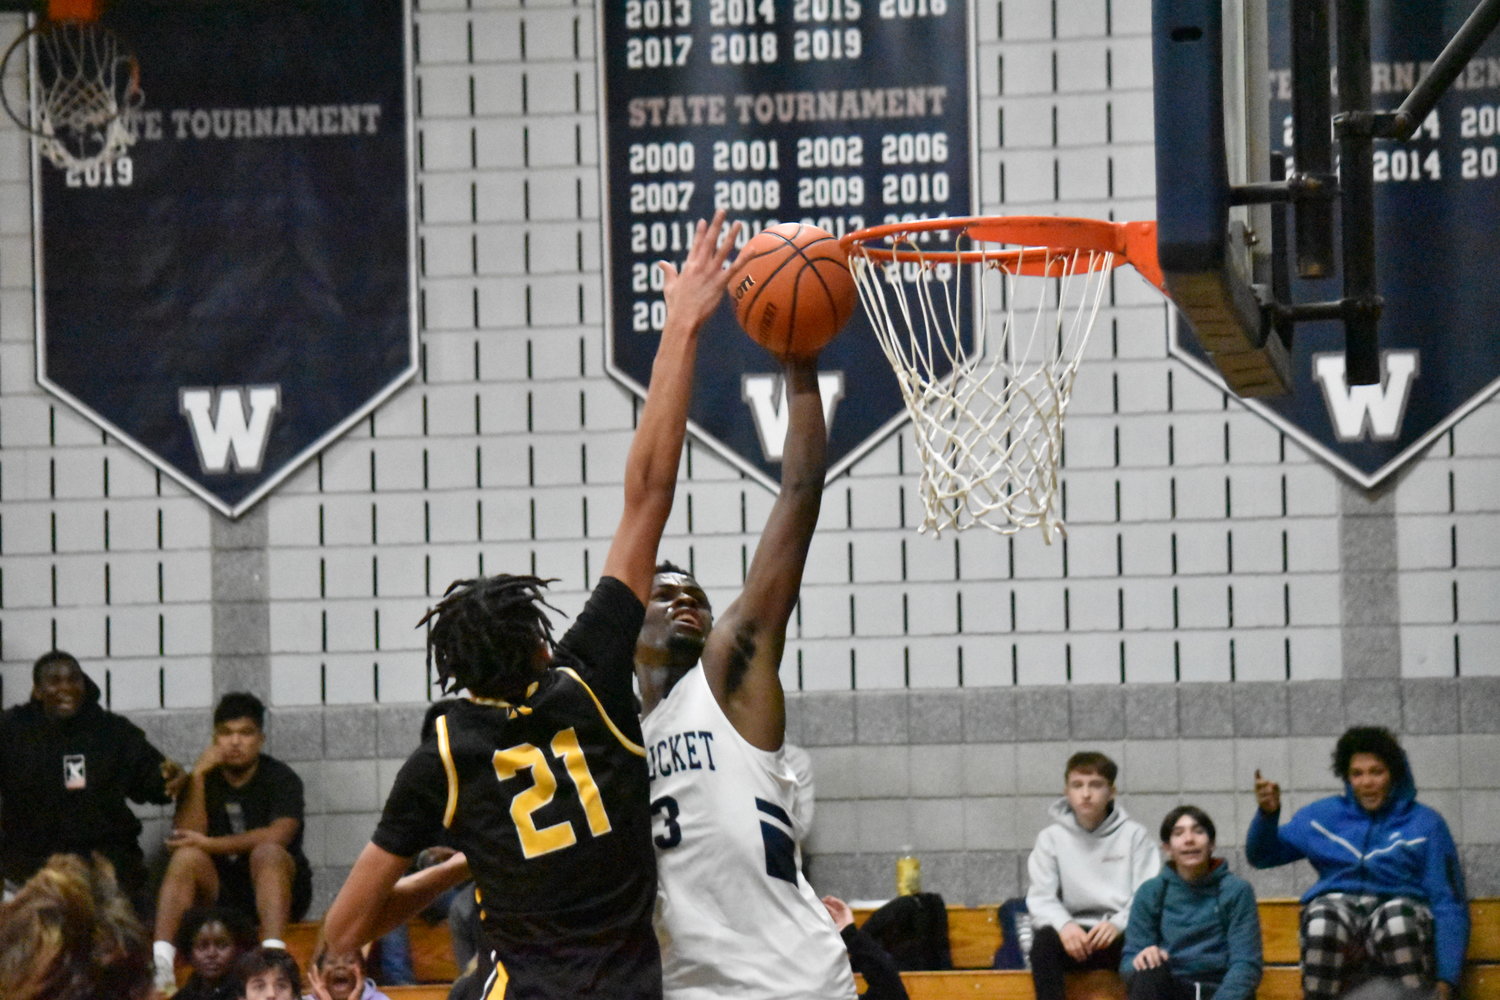 Jayquan Francis drives to the basket during the Whalers’ 50-48 loss last Thursday against Nauset in the team’s home opener.